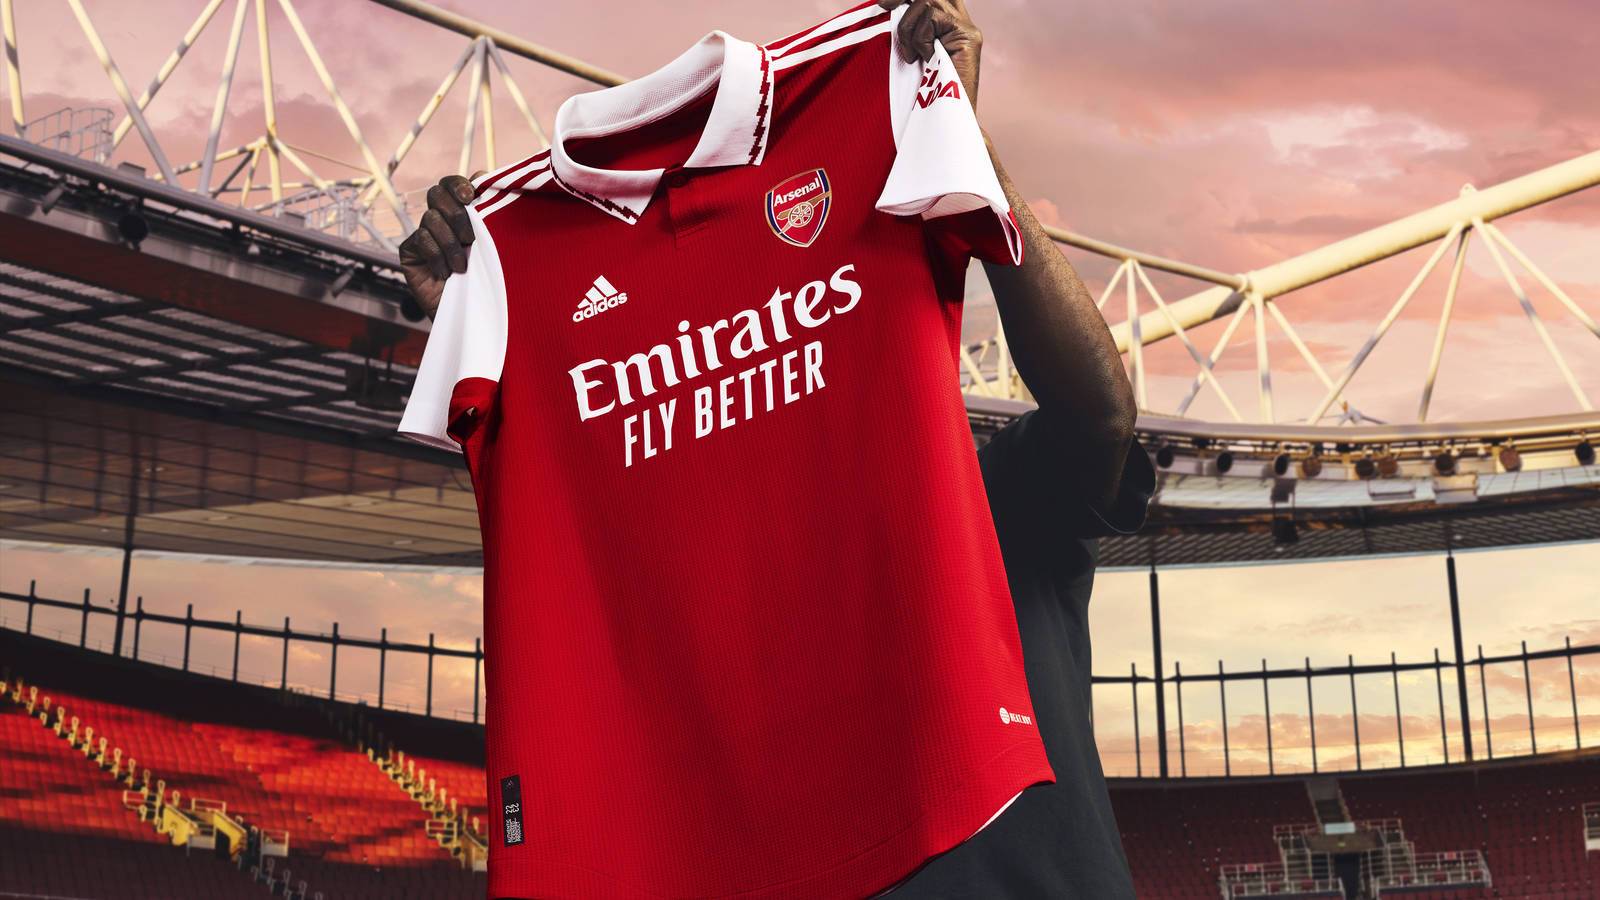 Win One Of Five Arsenal 22 23 Home Kits. Competition